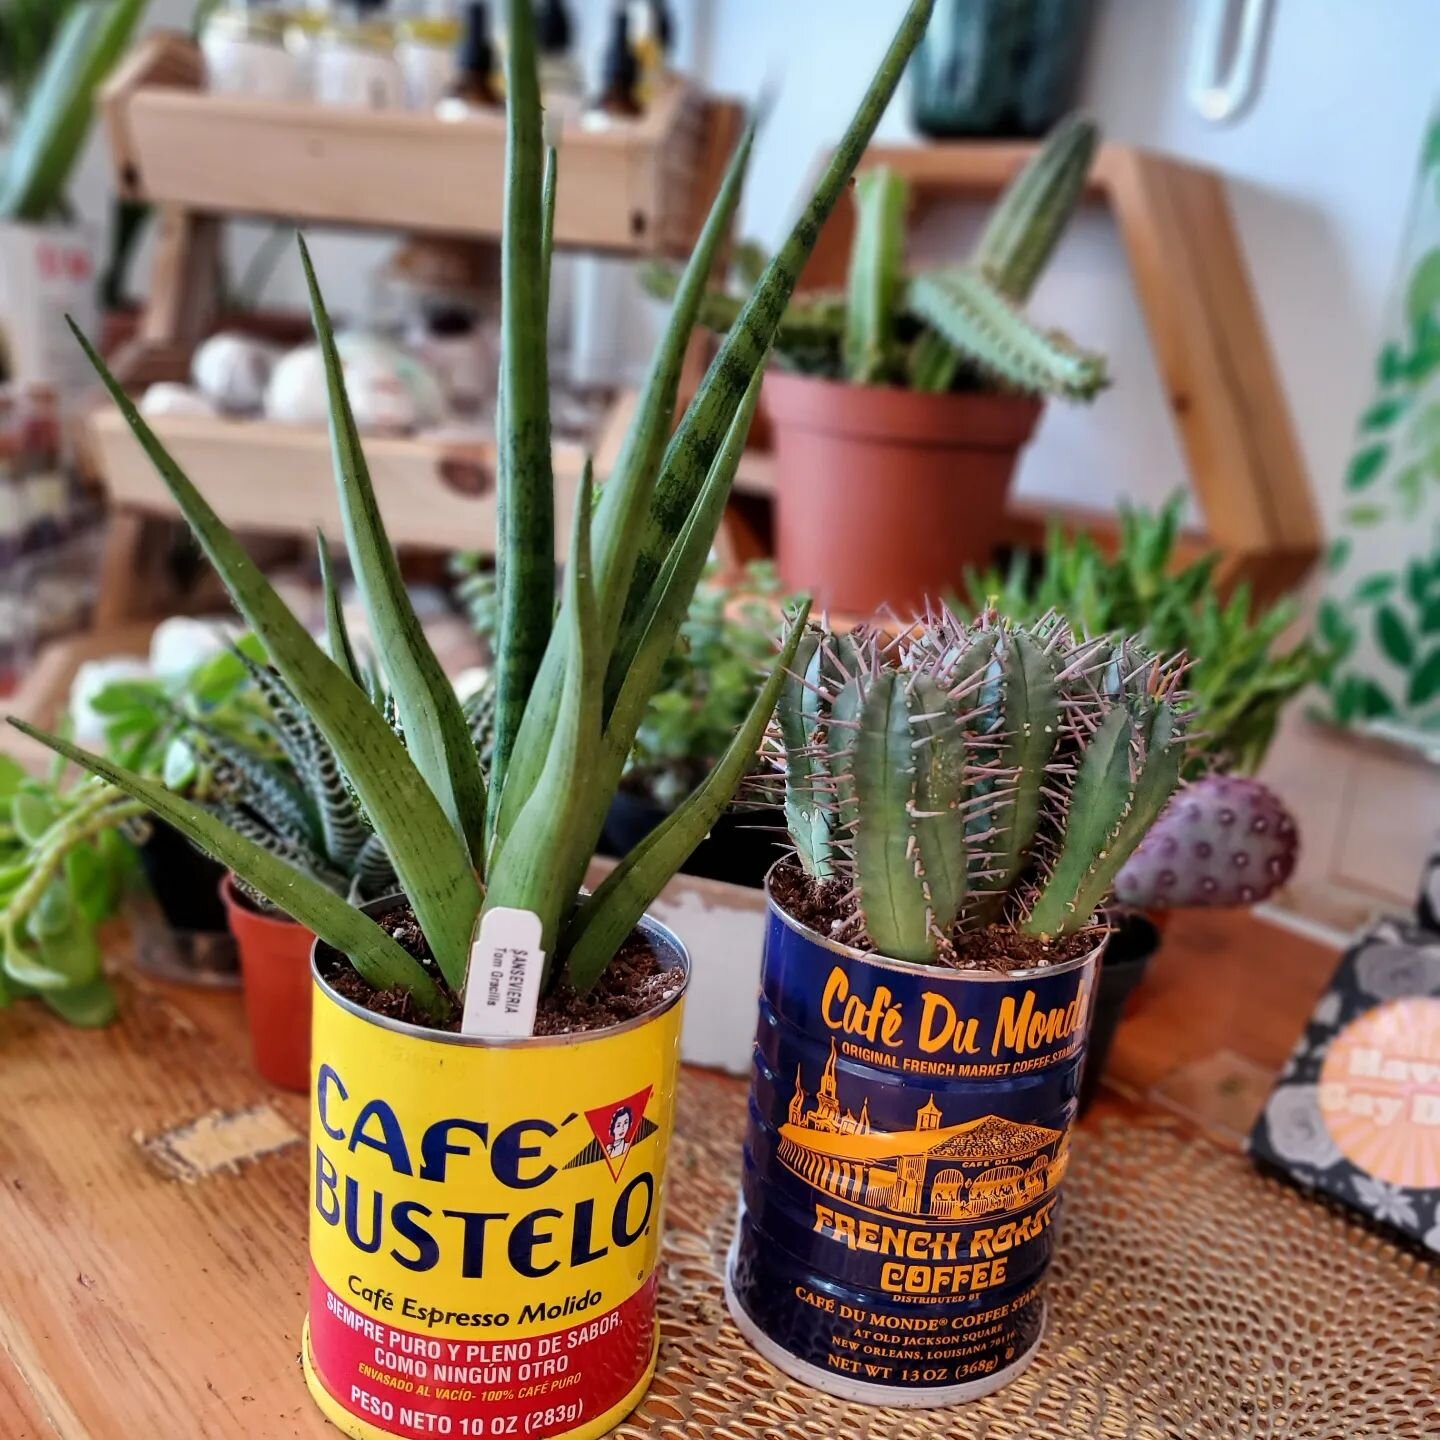 Don't toss those cool coffee tins, upcycle them as fun planters! I use a can opener to get rid of the inner lip on Bustelo cans and you can easily drill holes in the bottom for drainage or use an old school church key to poke cute triangle shaped hol